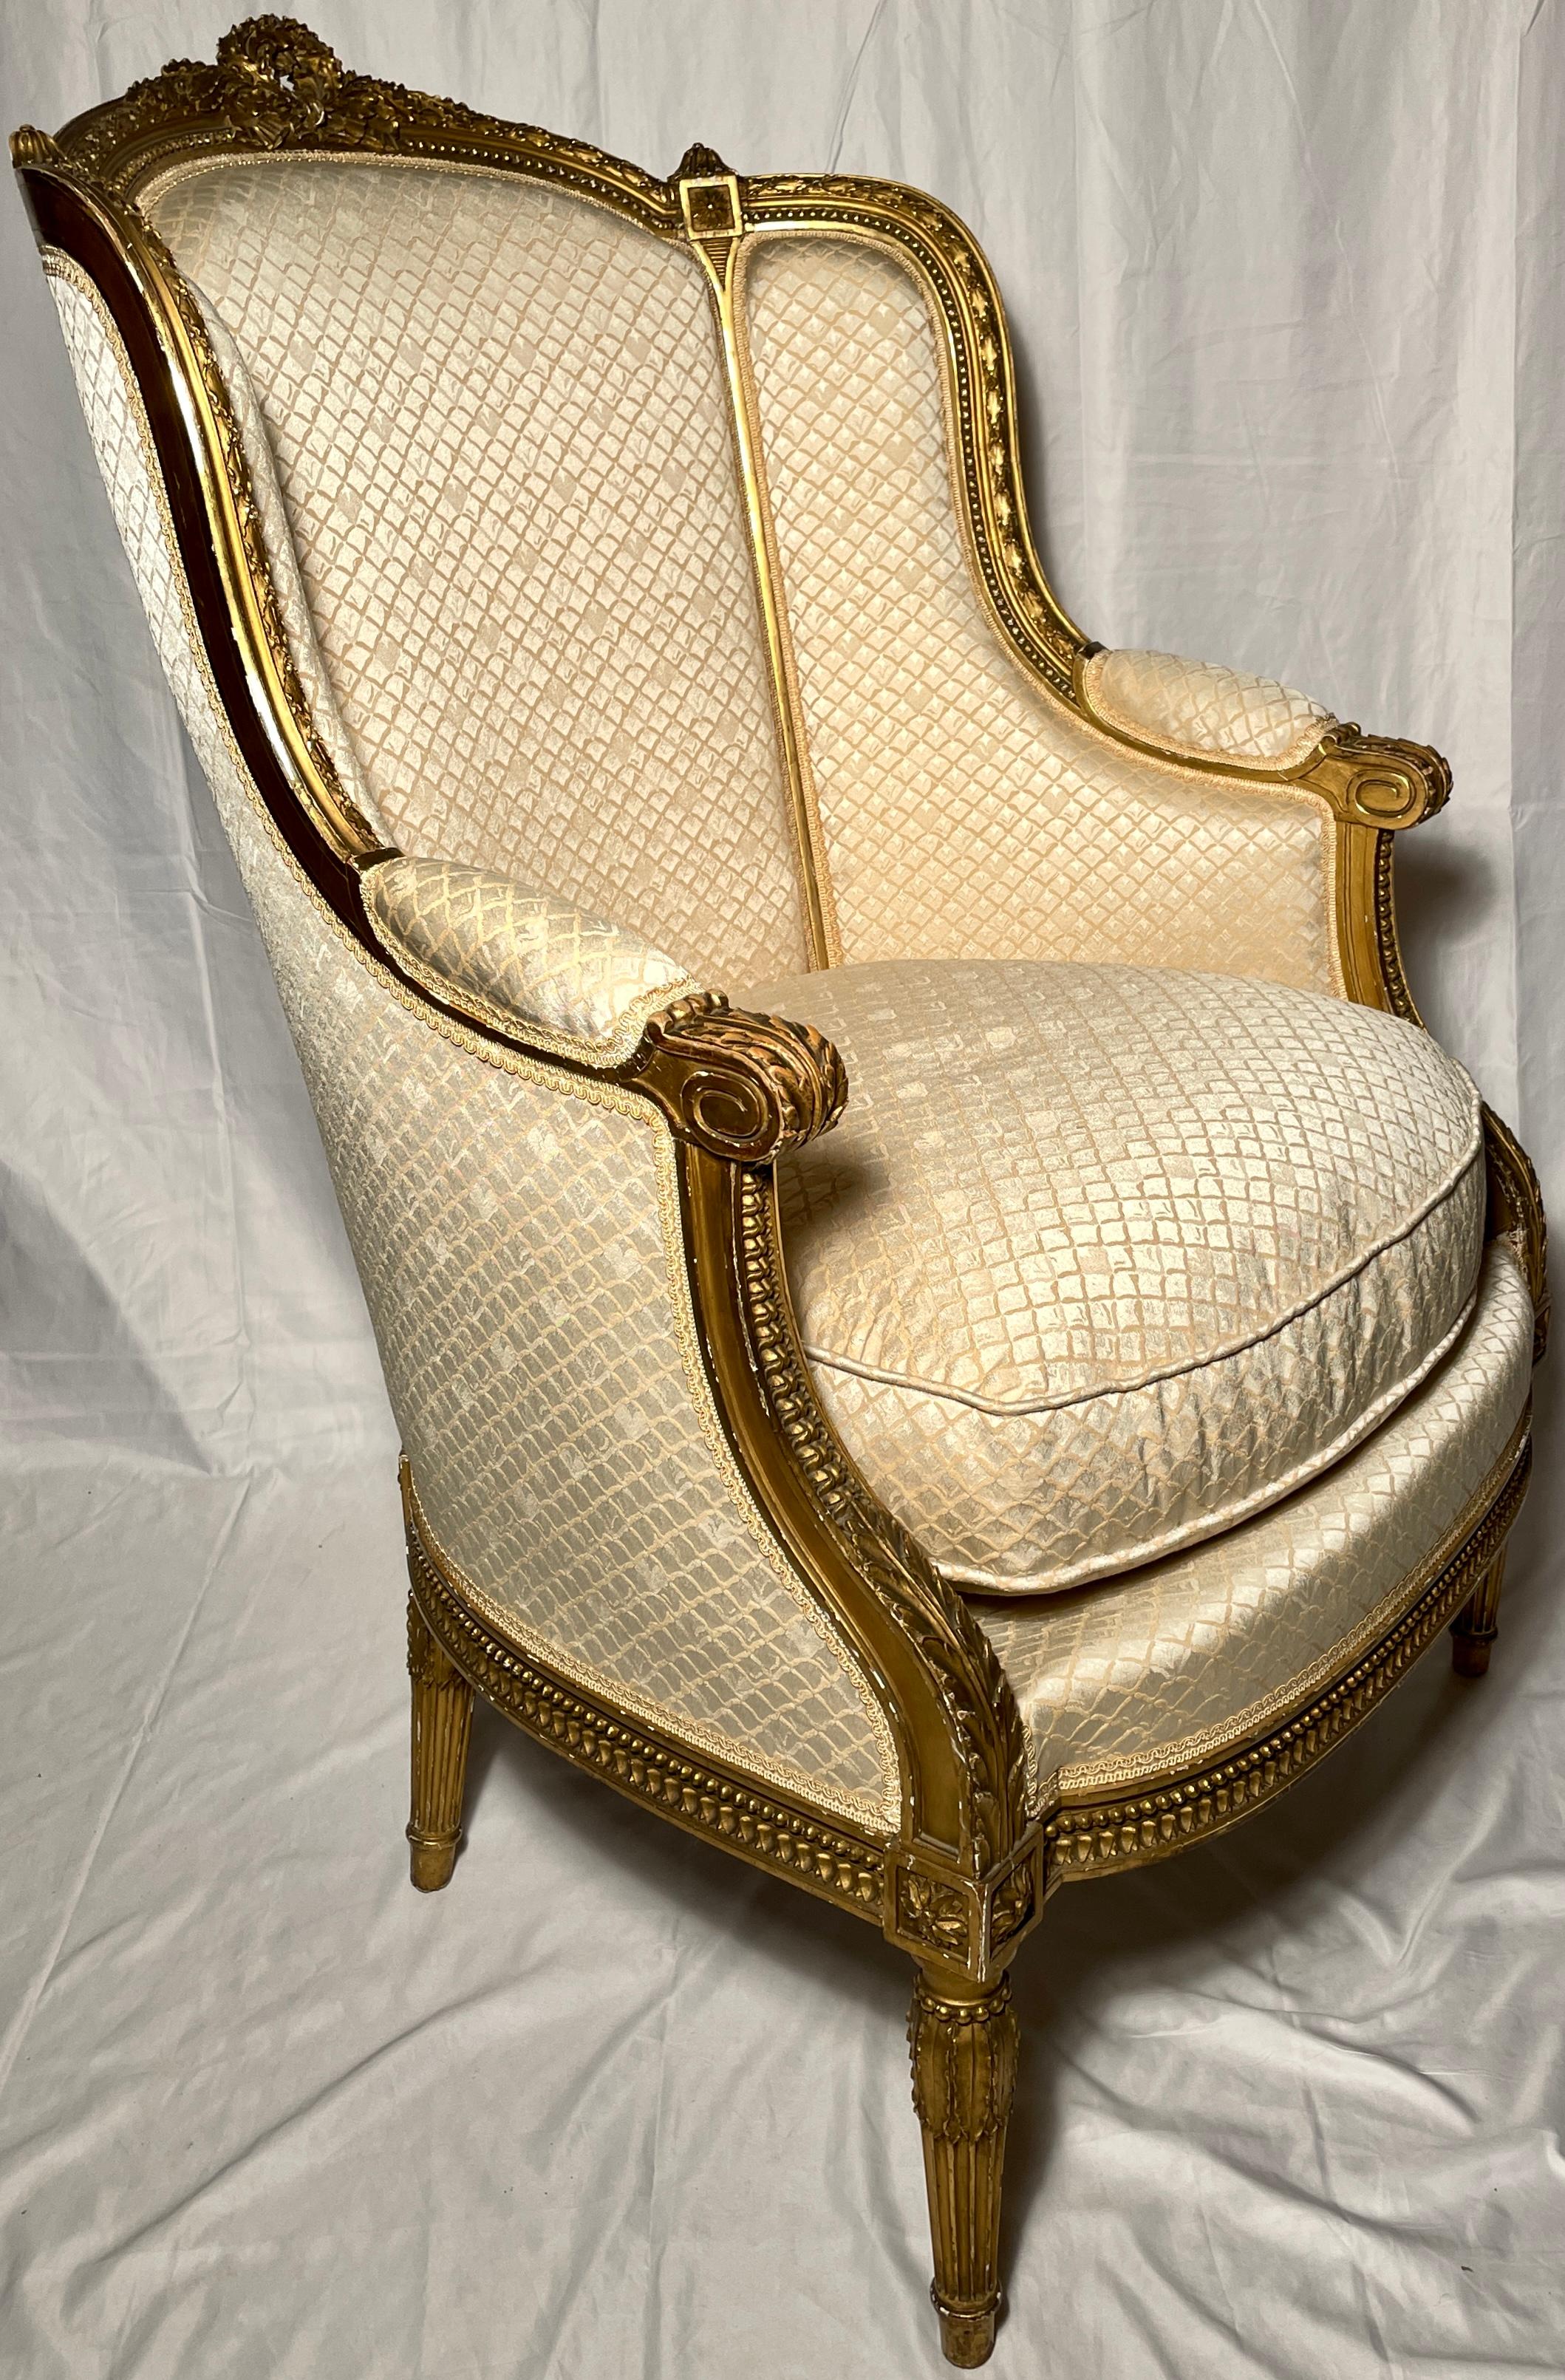 Pair Antique French Louis XVI Gold Leaf Fauteuils / Armchairs, Circa 1865-1875 In Good Condition For Sale In New Orleans, LA